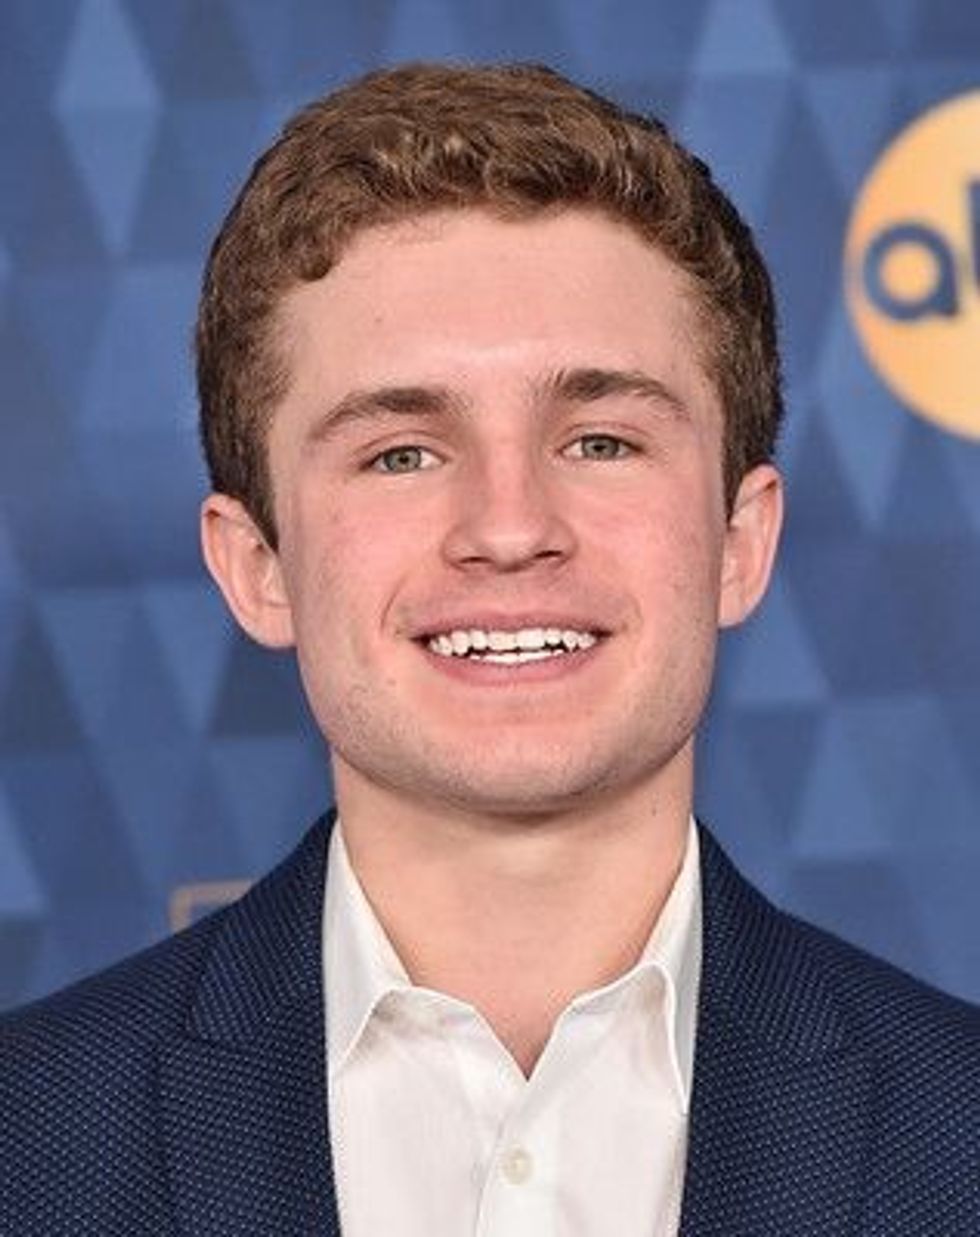 Sean Giambrone is a famous actor from America. Know more about his career, birthday, family, and net worth.